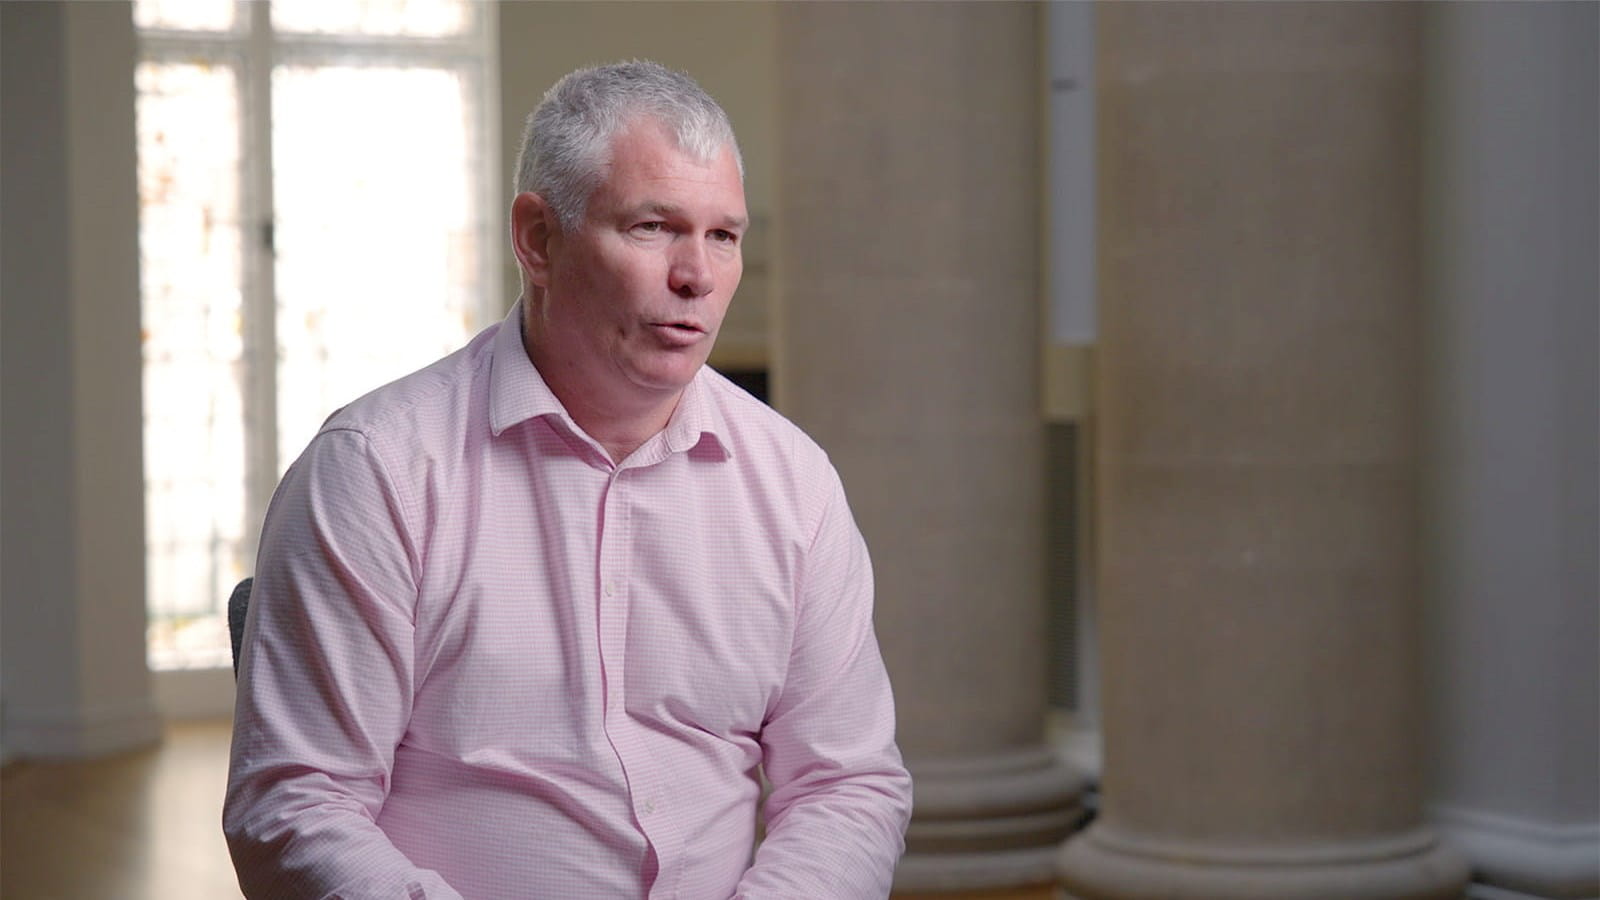 Tim Rush, Audit Partner, KPMG, talks about why he thinks audit is a career with a future